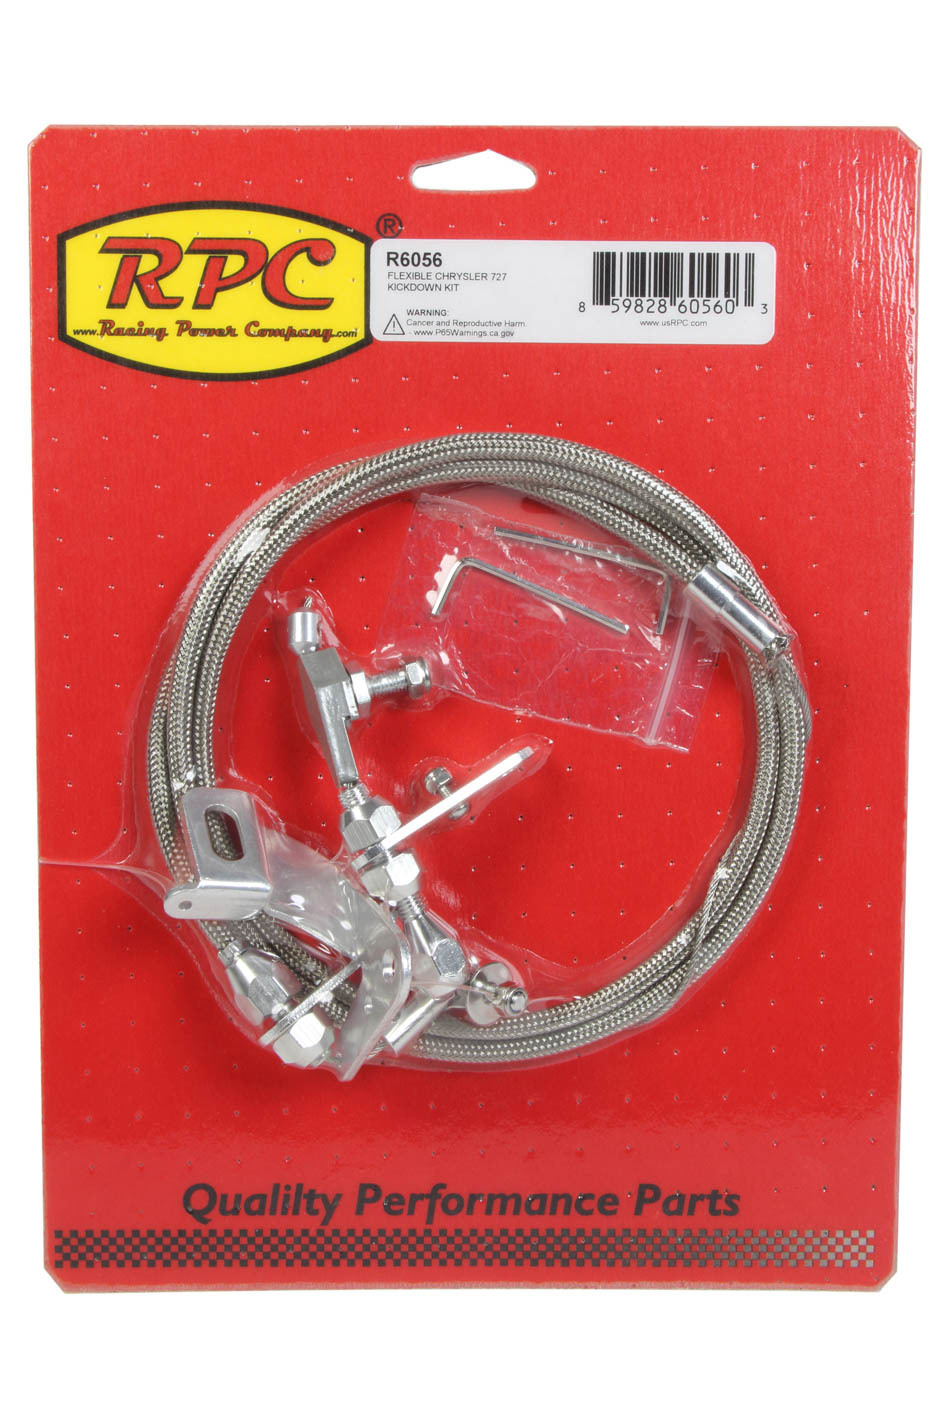 Racing Power Company R6056 Kickdown Cable, Braided Stainless, Fittings, Natural, Torqueflite 727, Kit